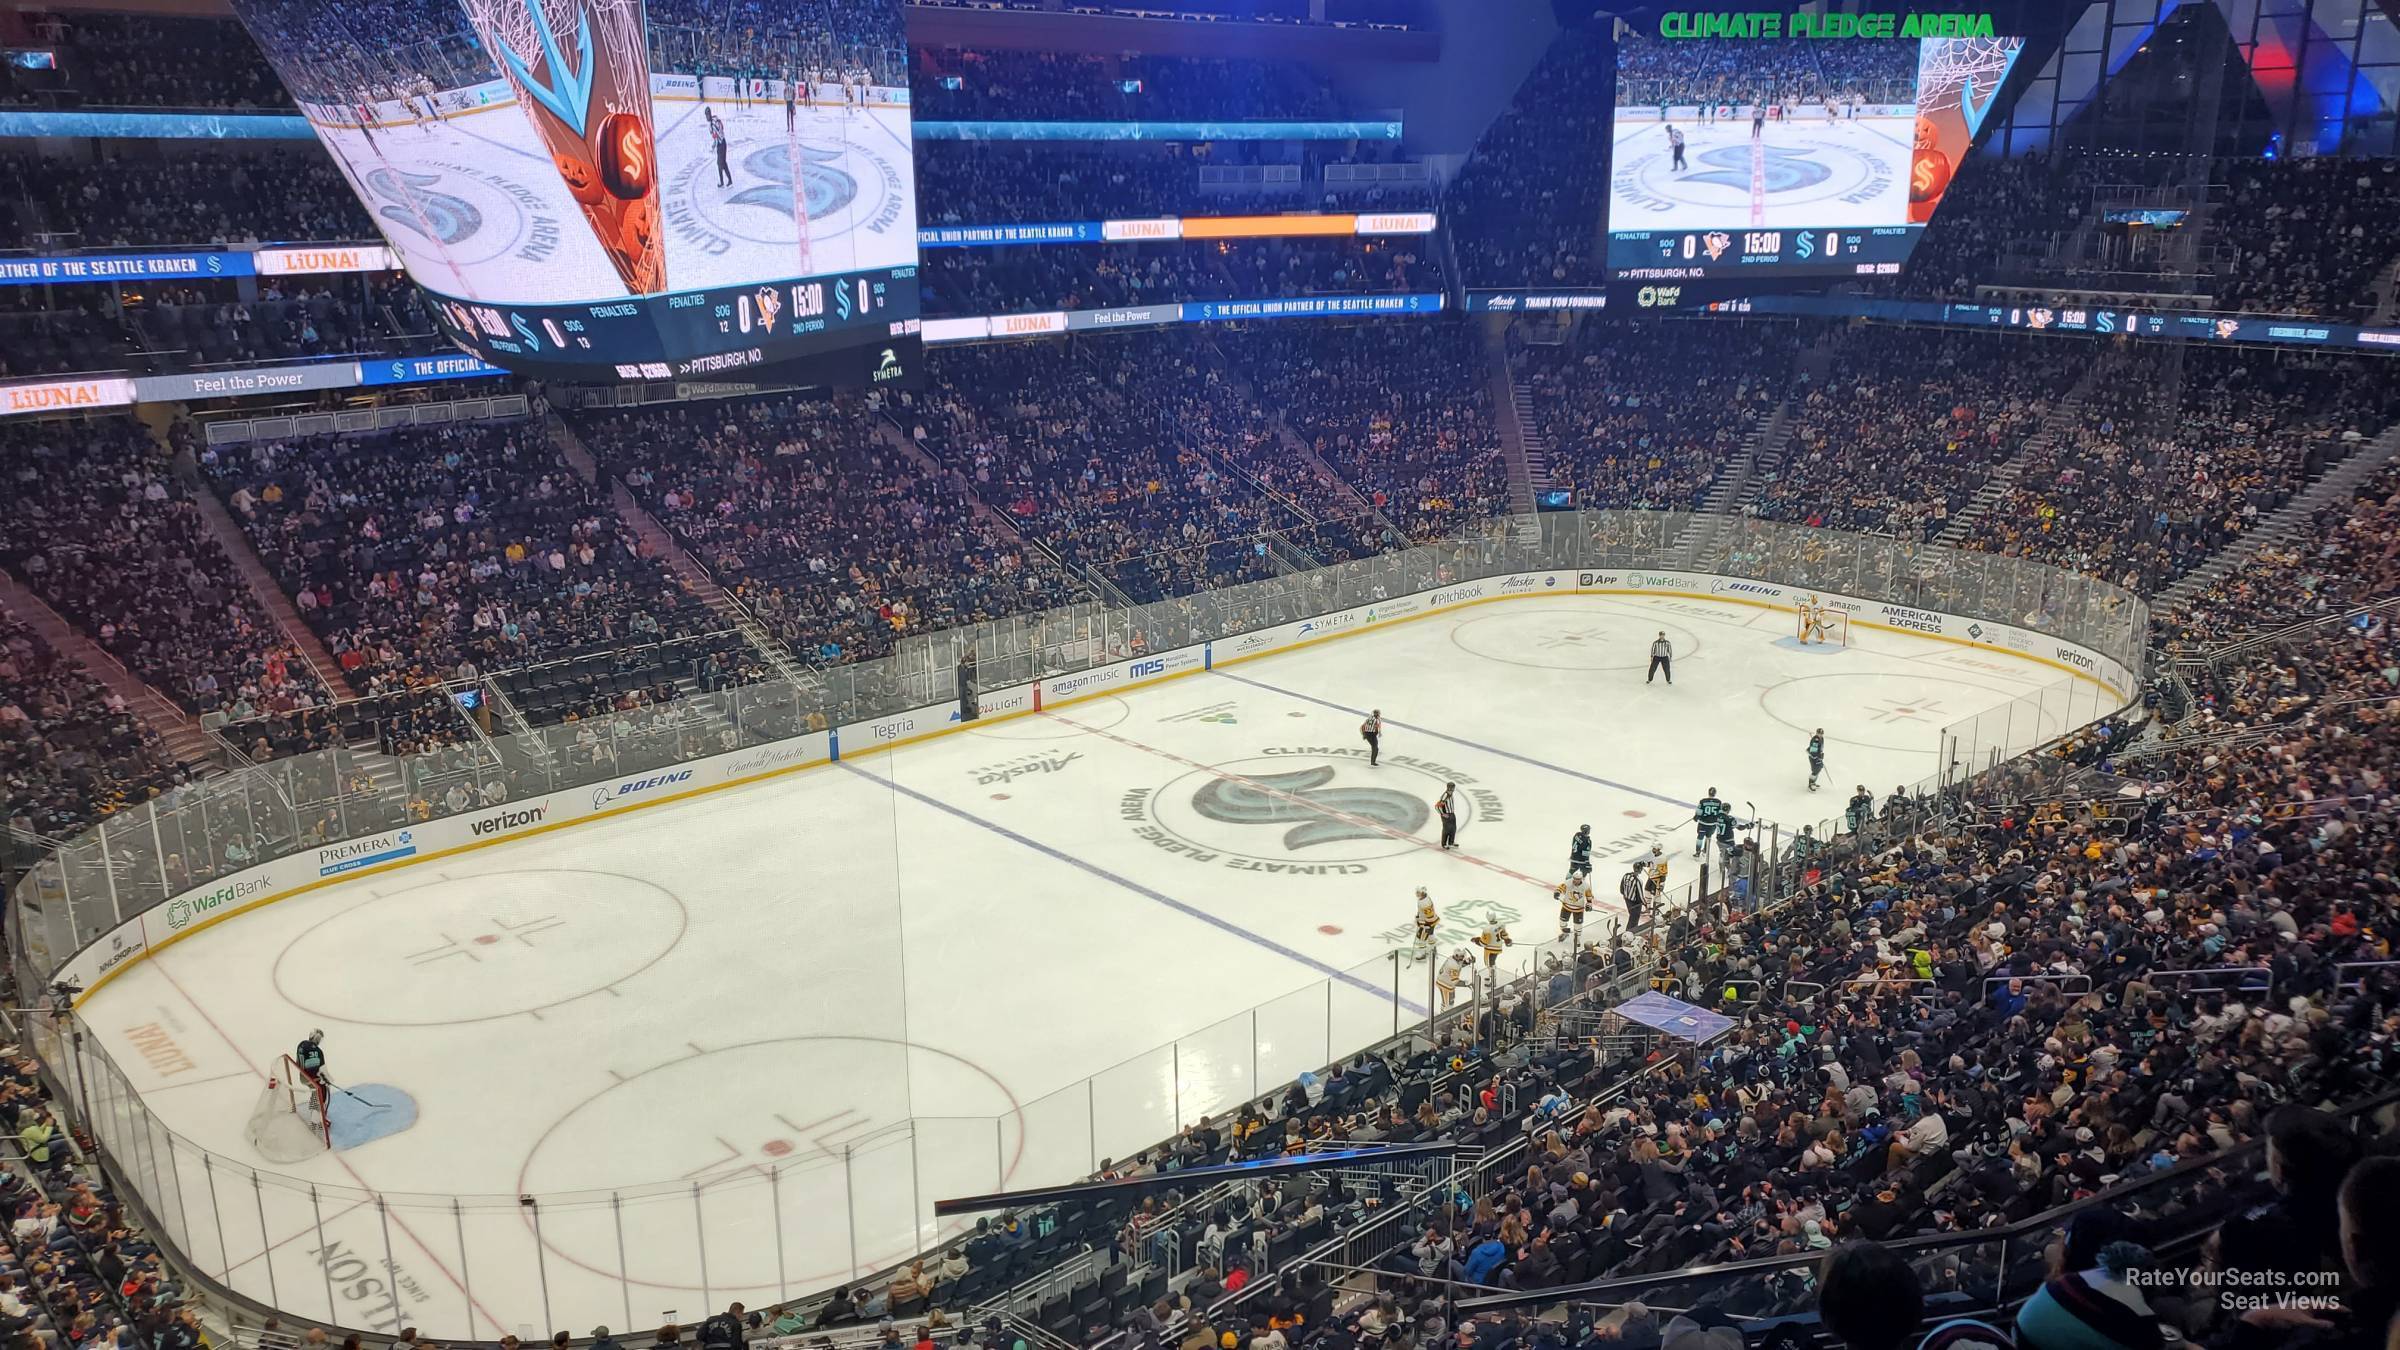 section 104, row bar seat view  for hockey - climate pledge arena